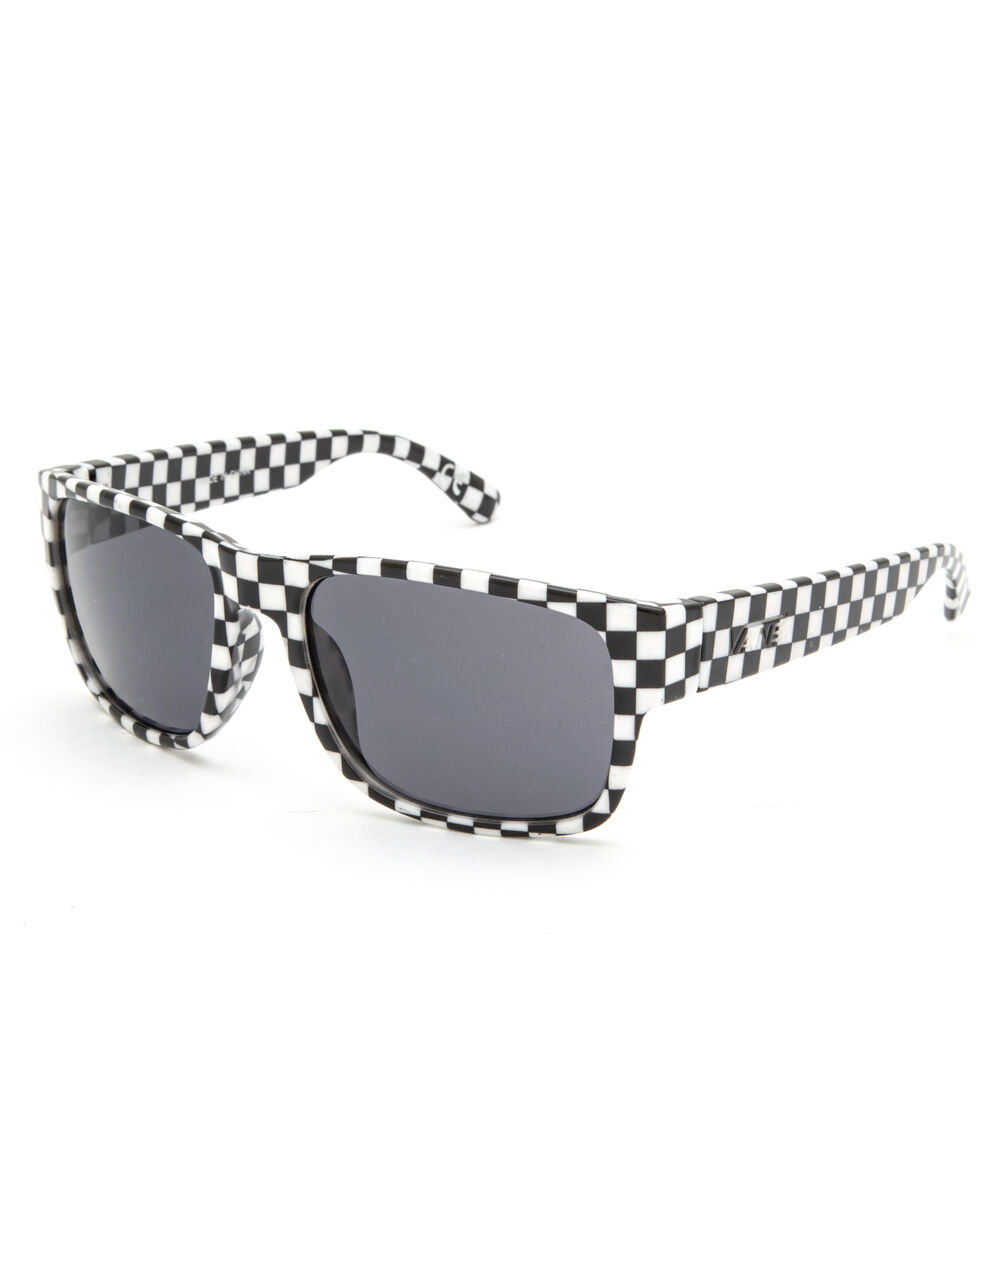 VANS Darr Wrap Checkered Sunglasses - BLKWH - VN0A31JE